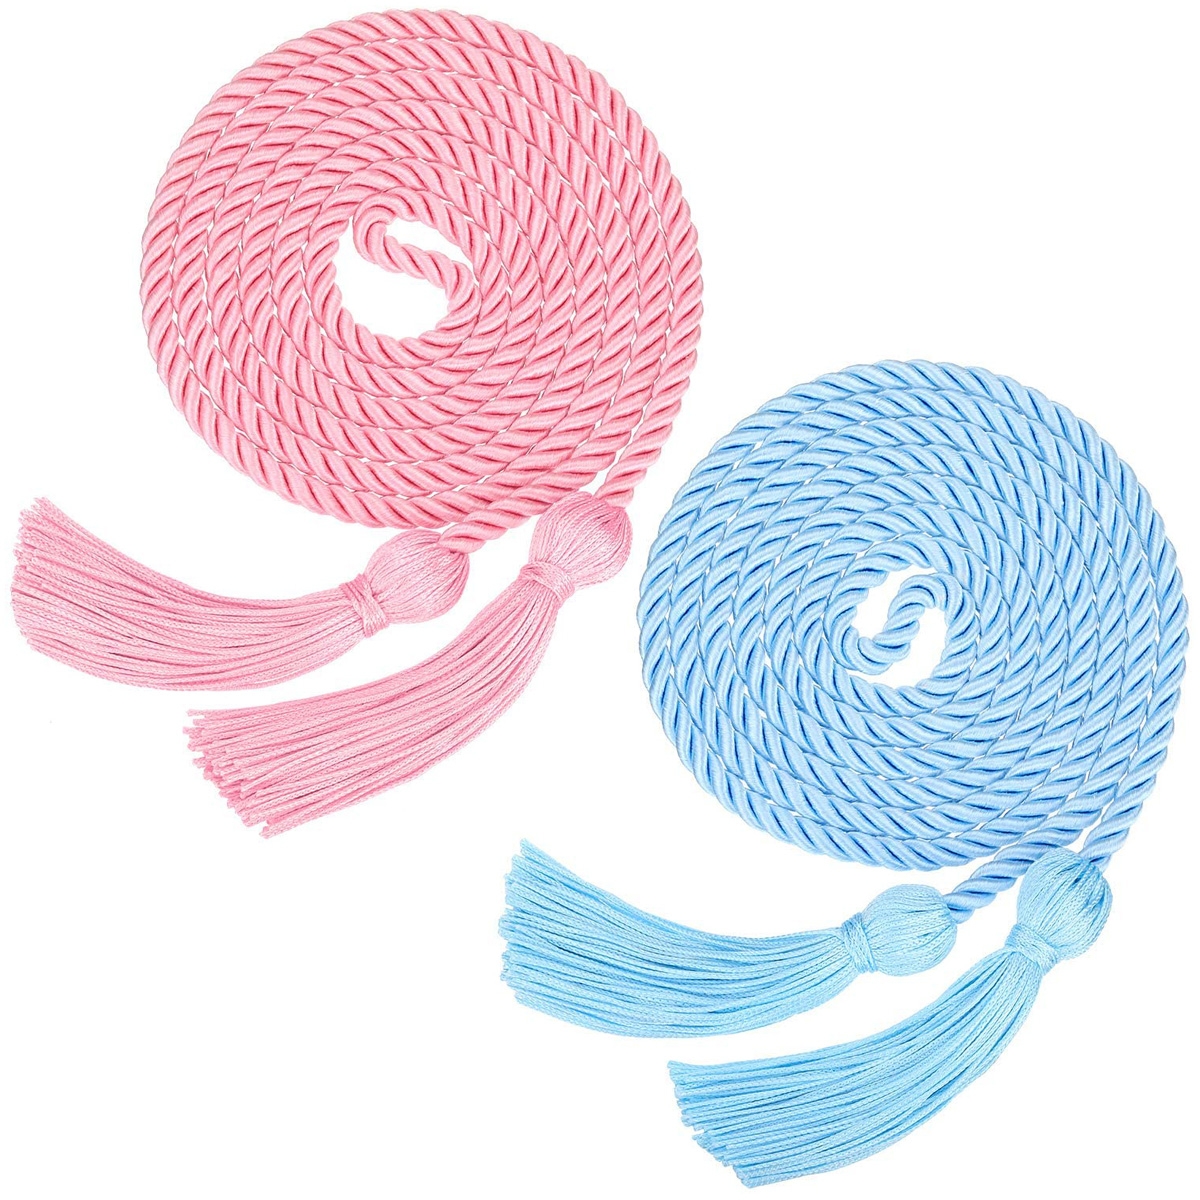 Graduation Cords Polyester Yarn Honor Cord with Tassel for Graduation Students (Rosy and Sky Blue)